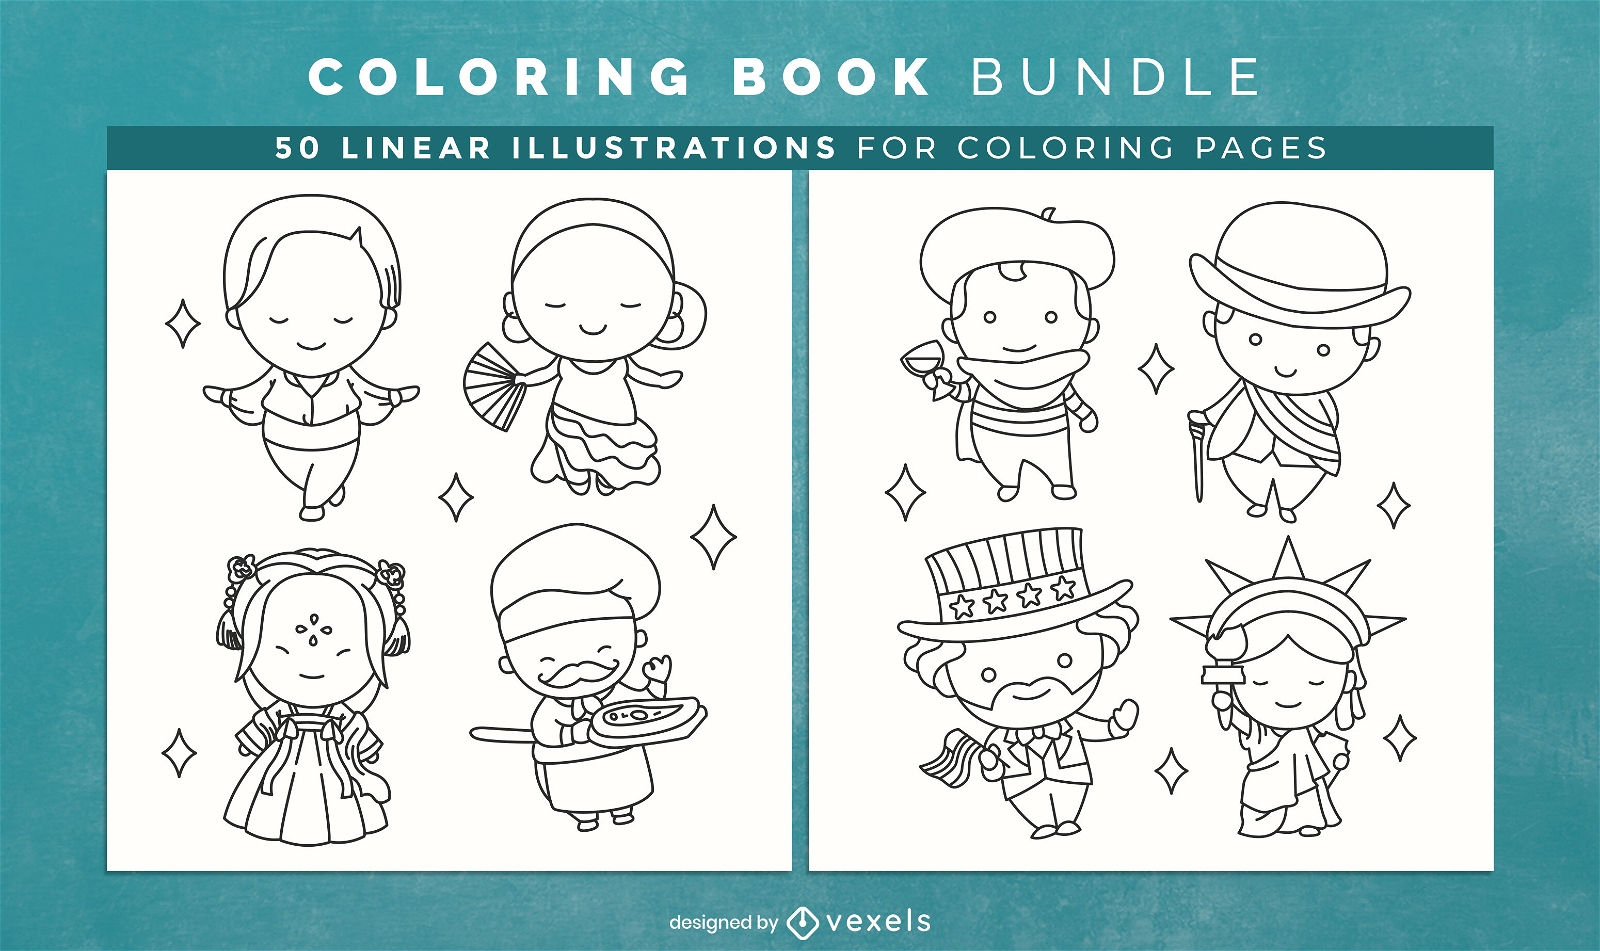 Chibi country character coloring book design pages